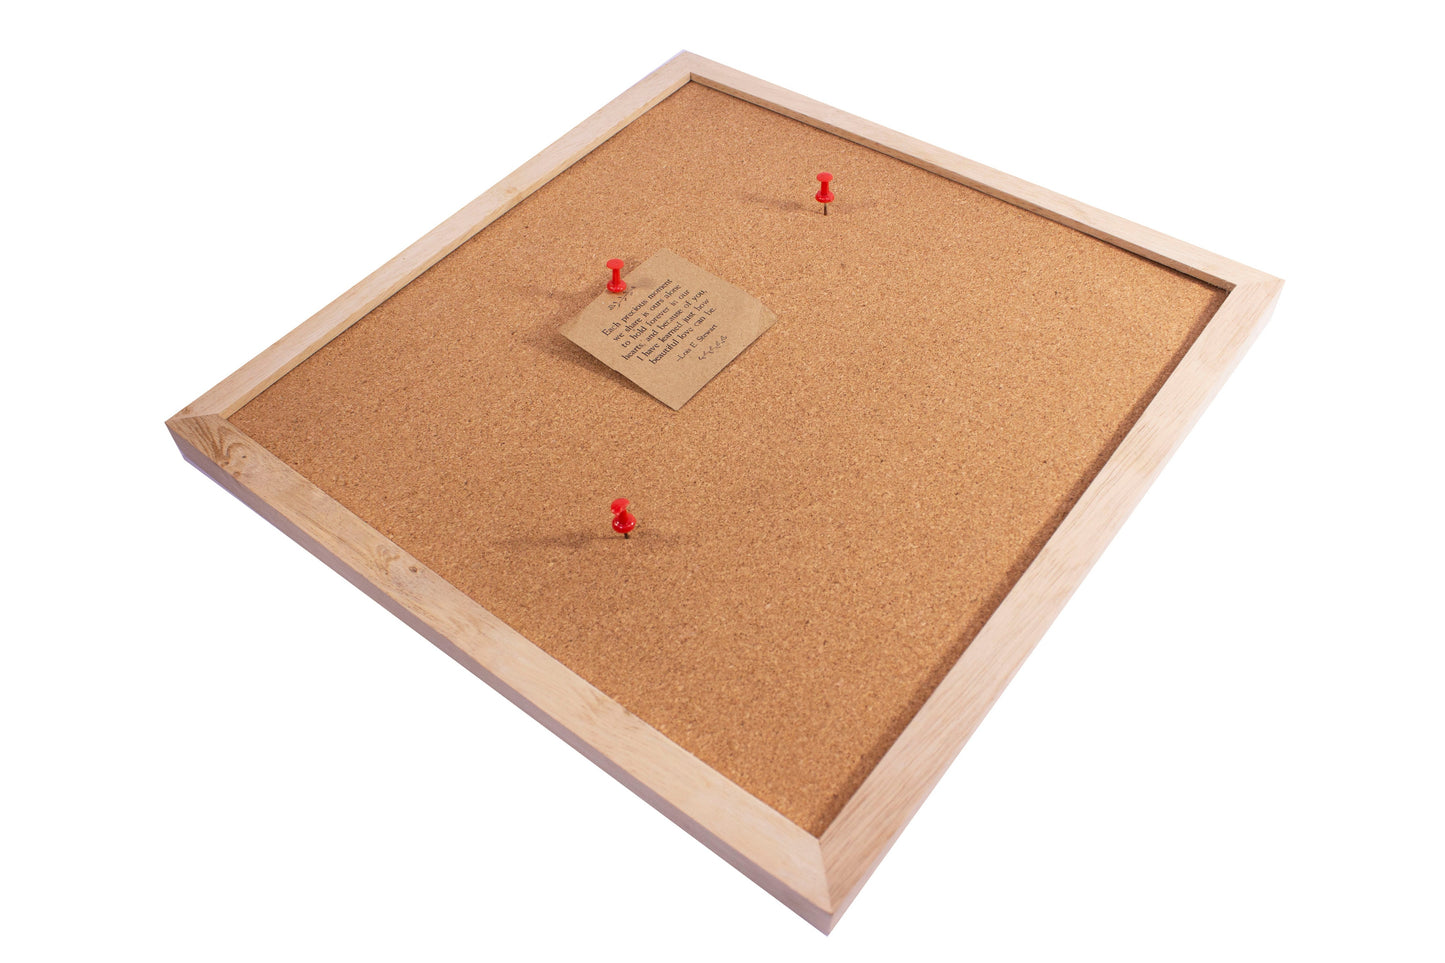 Corkboard with Wooden Frame